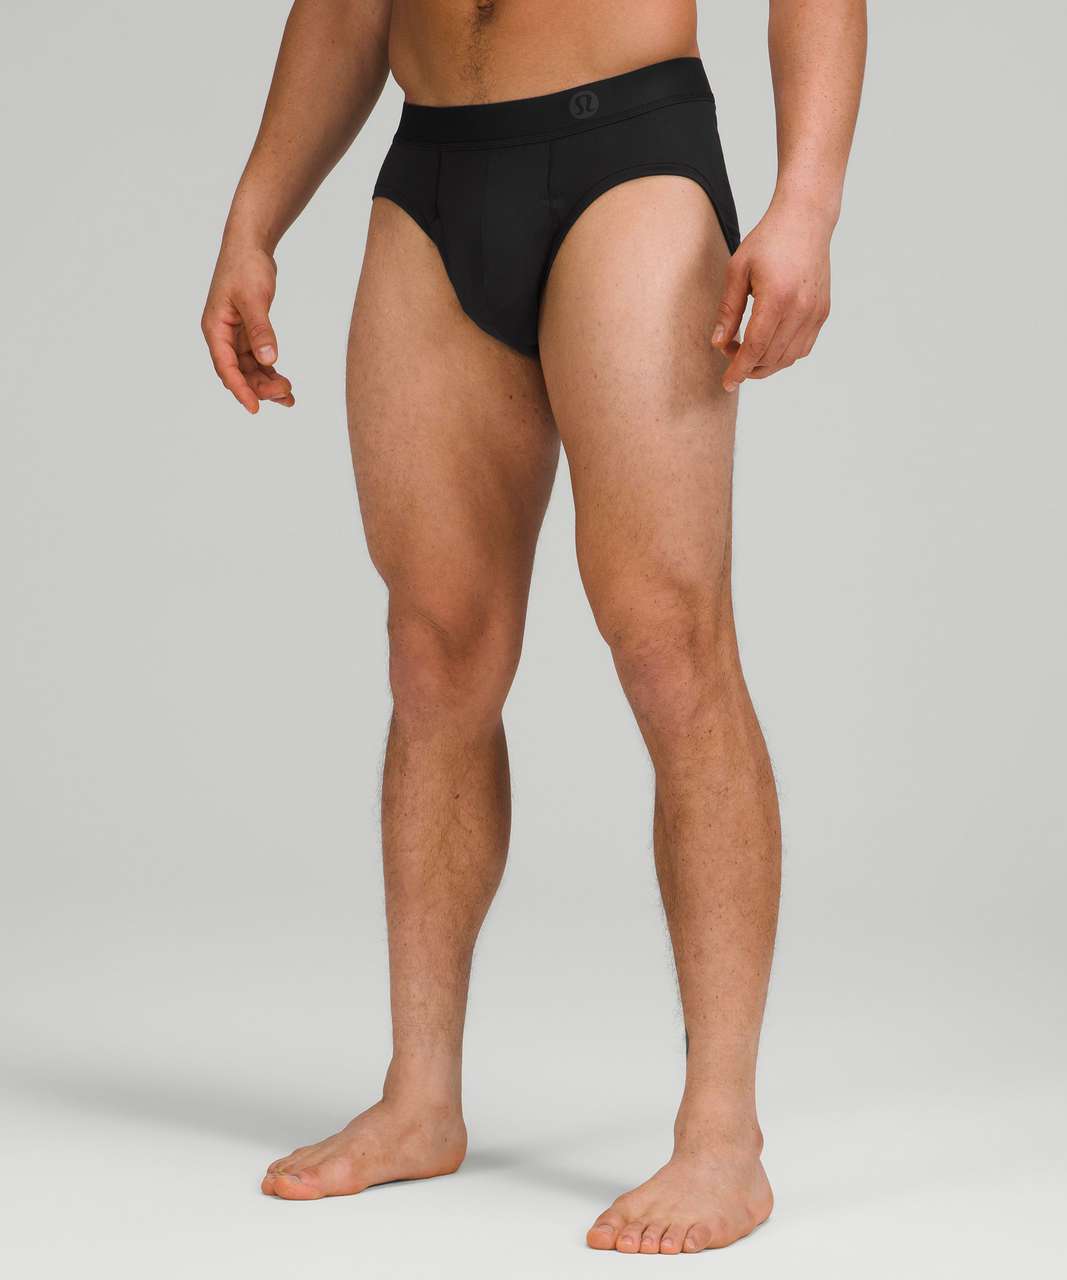 Lululemon Always In Motion Brief with Fly - Black